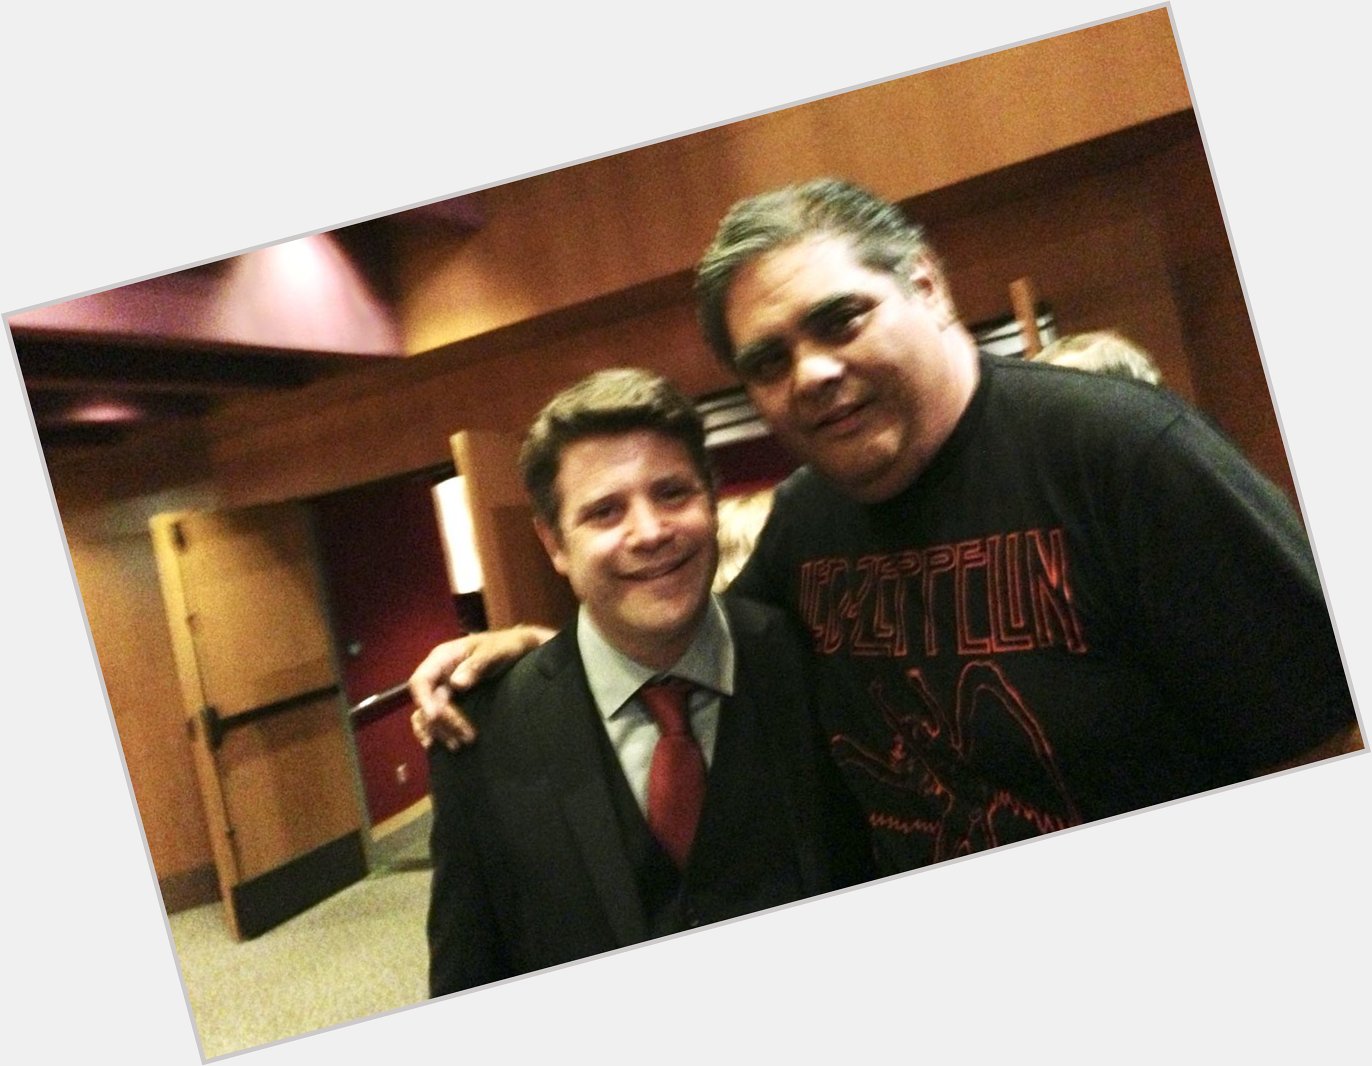 A belated happy birthday to the bravest Hobbit Sean Astin who has joined Club 50 